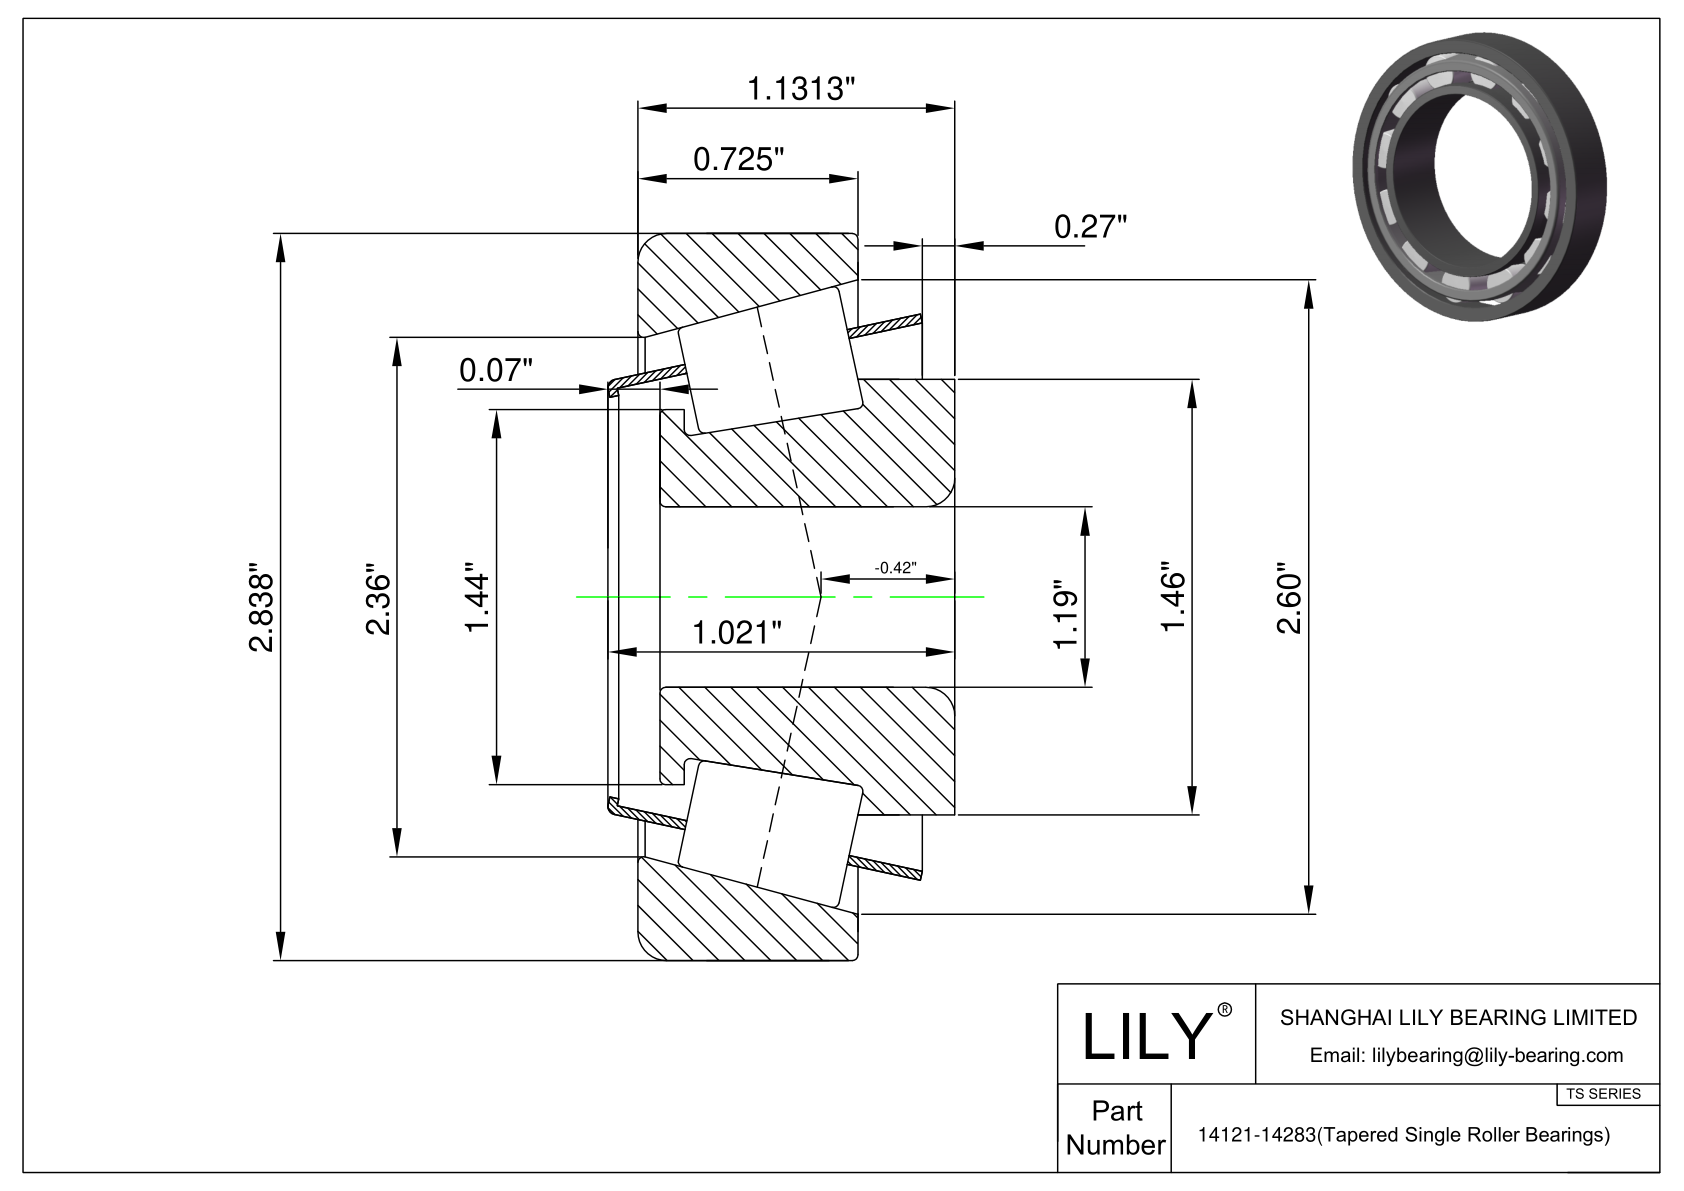 14121-14283 TS (Tapered Single Roller Bearings) (Imperial) cad drawing